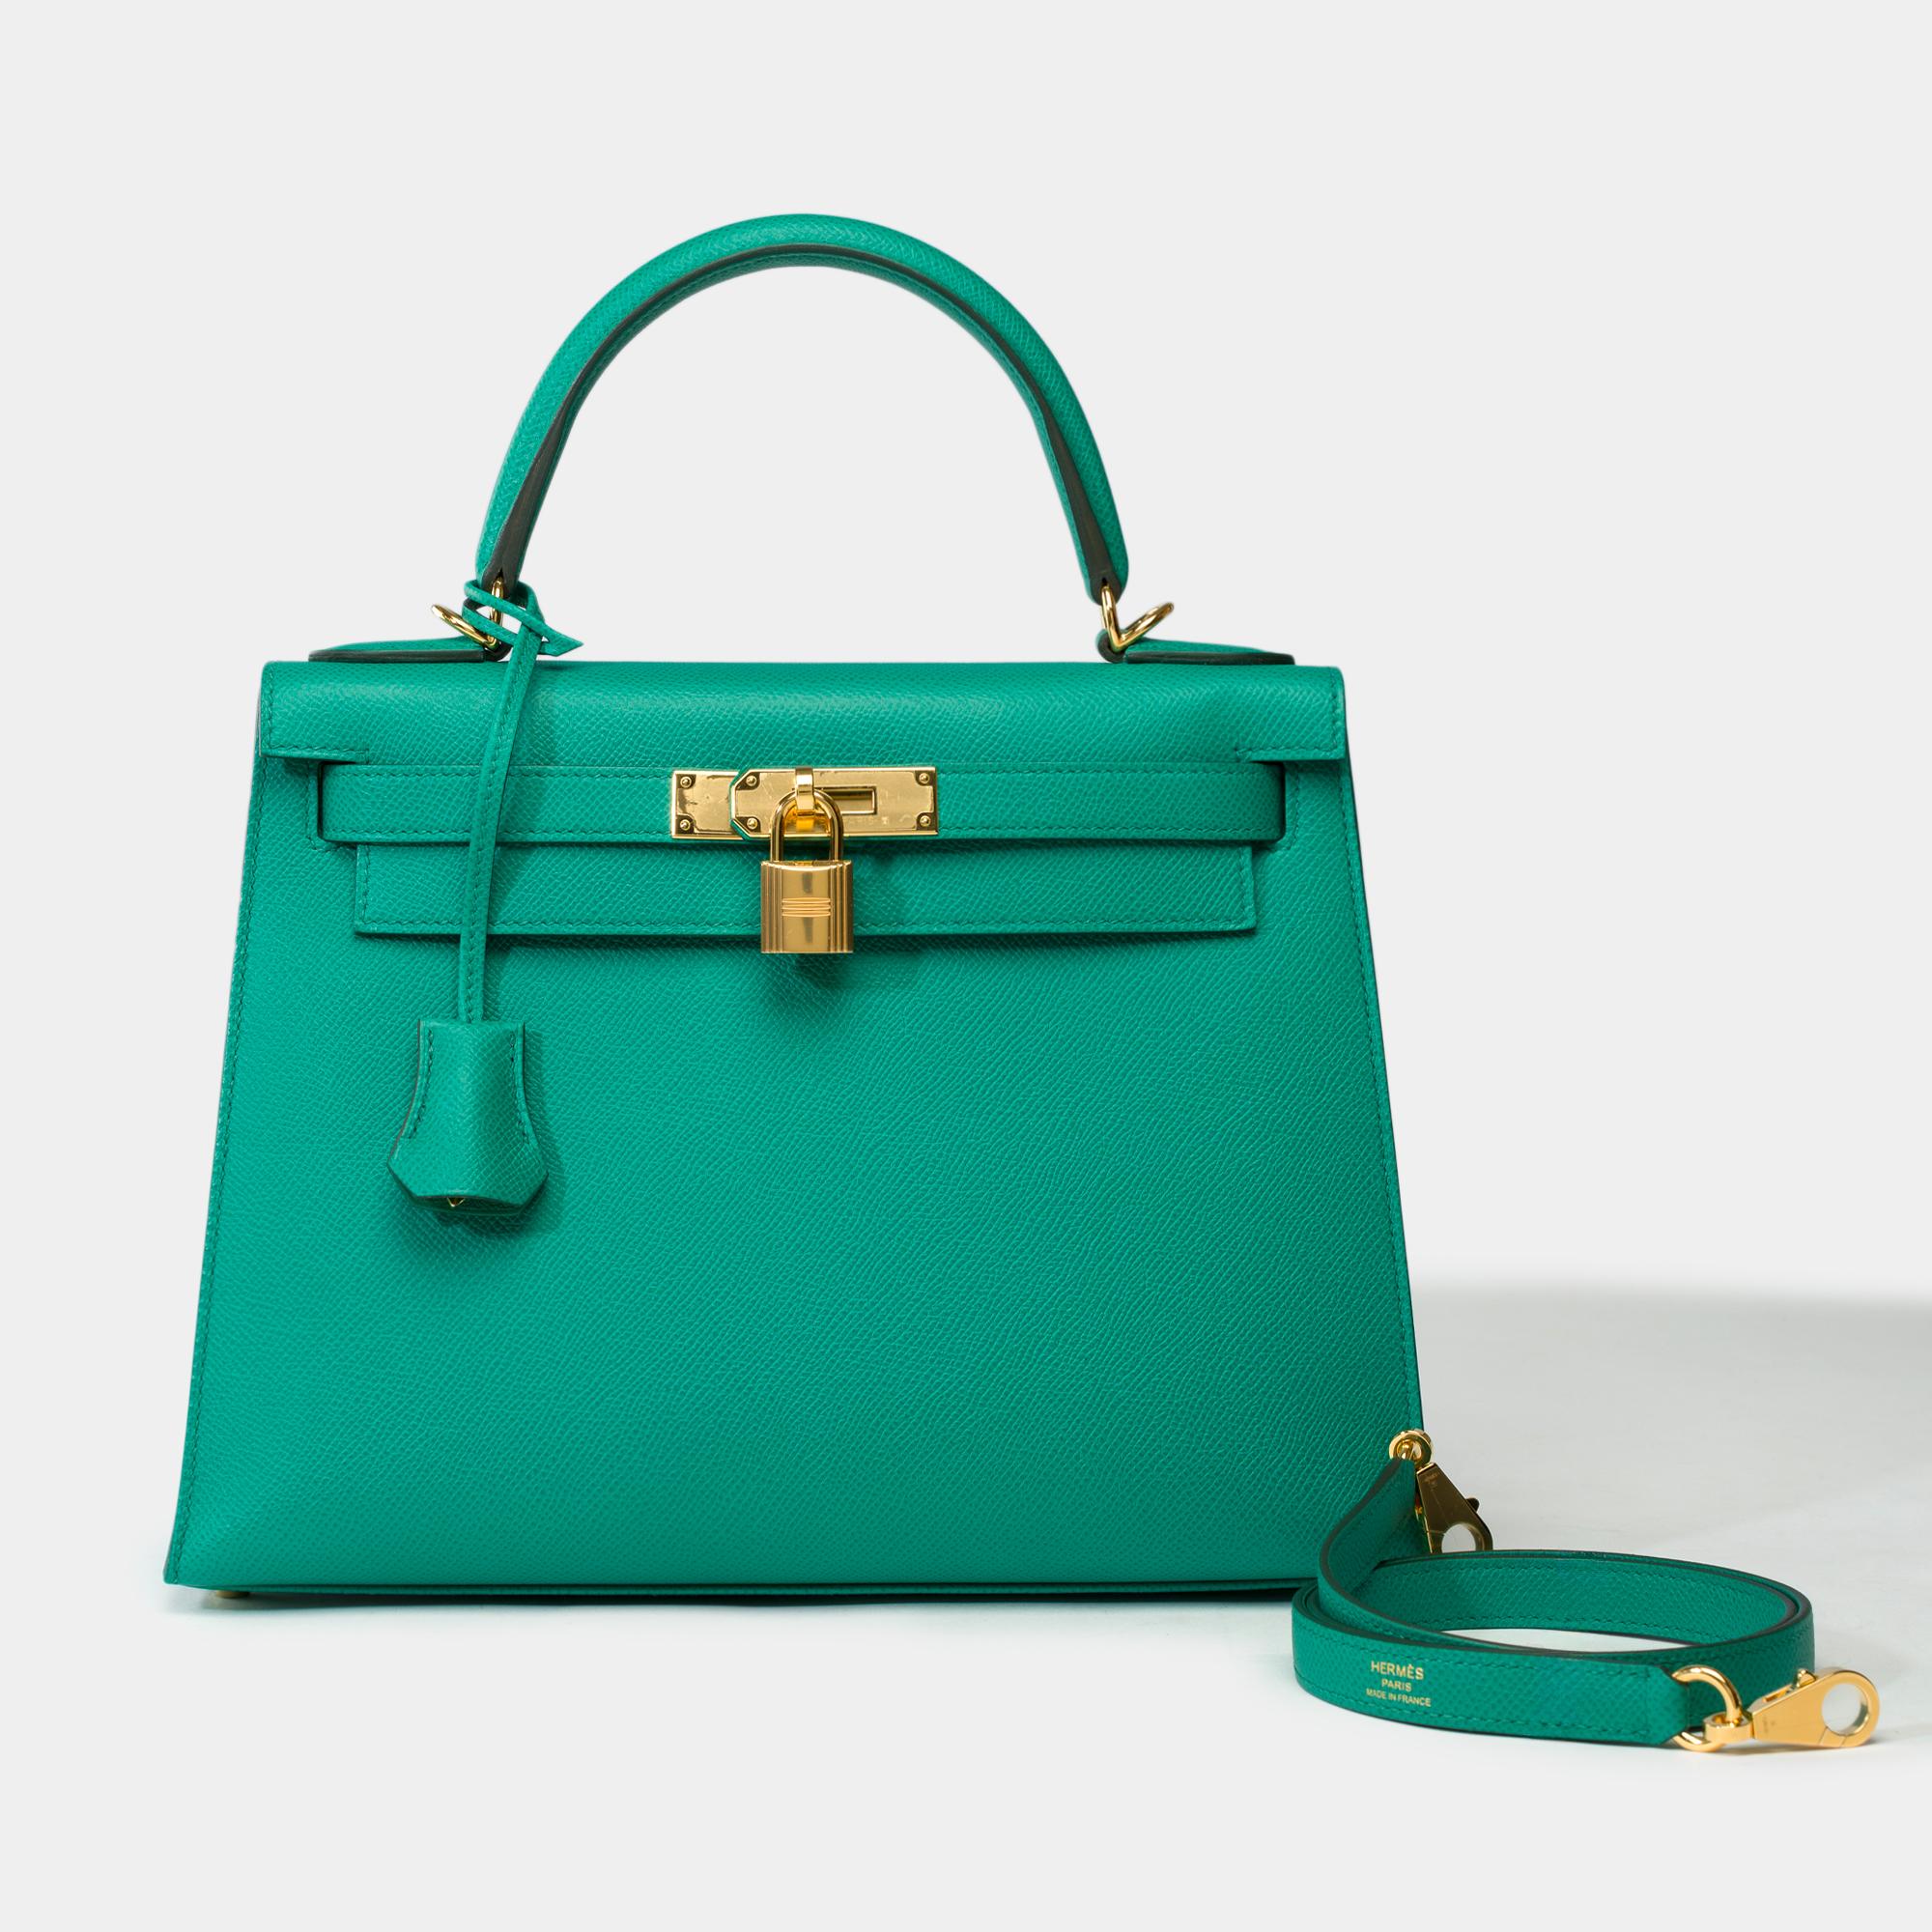 Stunning​ ​Hermes​ ​Kelly​ ​28​ ​sellier​ ​handbag​ ​strap​ ​in​ ​Vert​ ​Jade​ ​Epsom​ ​calf​ ​leather,​ ​gold​ ​plated​ ​metal​ ​trim,​ ​green​ ​leather​ ​handle,​ ​removable​ ​shoulder​ ​strap​ ​in​ ​green​ ​leather​ ​for​ ​a​ ​hand​ ​or​